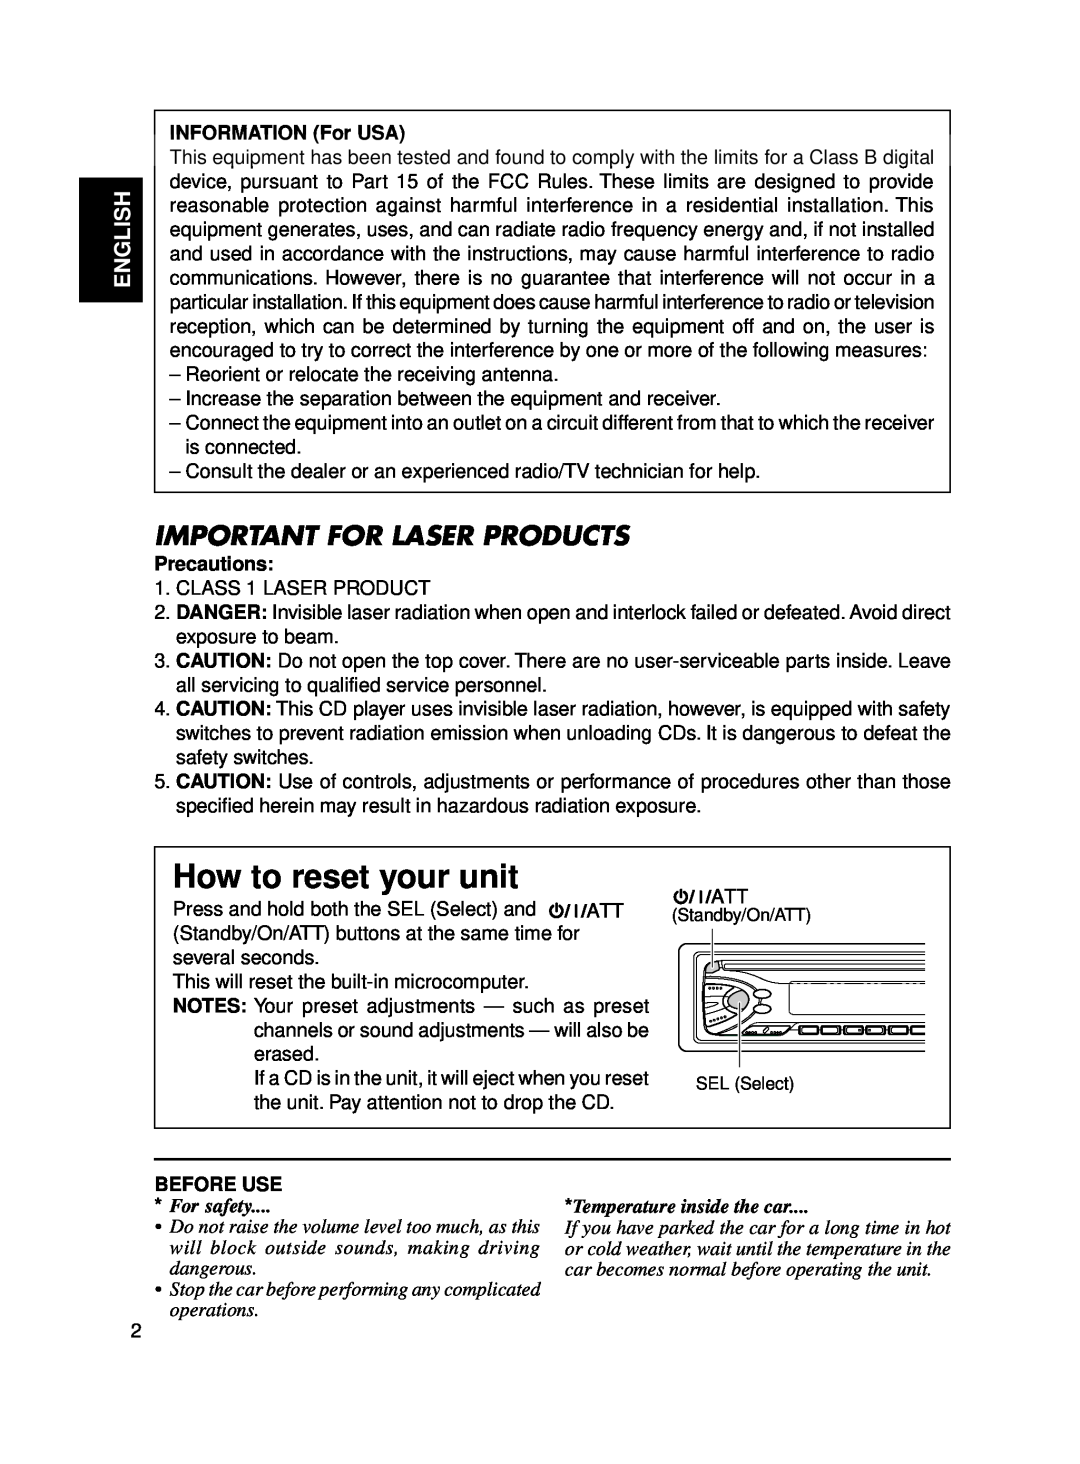 JVC KD-S550 How to reset your unit, Important For Laser Products, English, INFORMATION For USA, Precautions, Before Use 